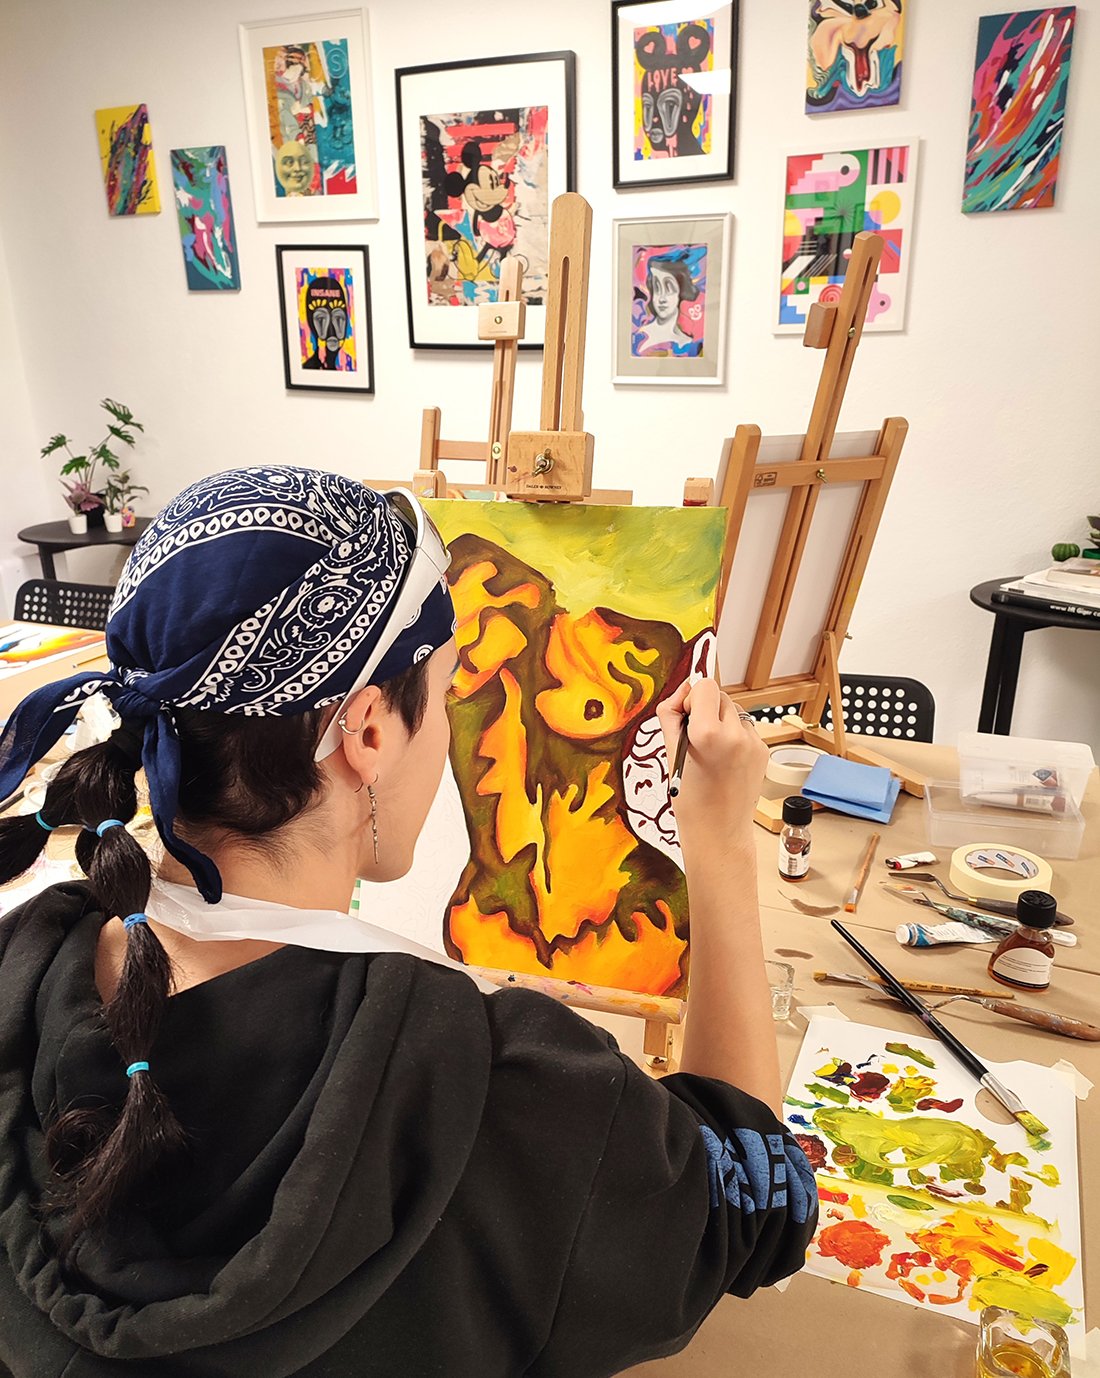 painting  class in Lisbon, oil painting workshop, art studio in Lisbon, Meet Art Studio, painting class in lisbon, Abstract art.jpg